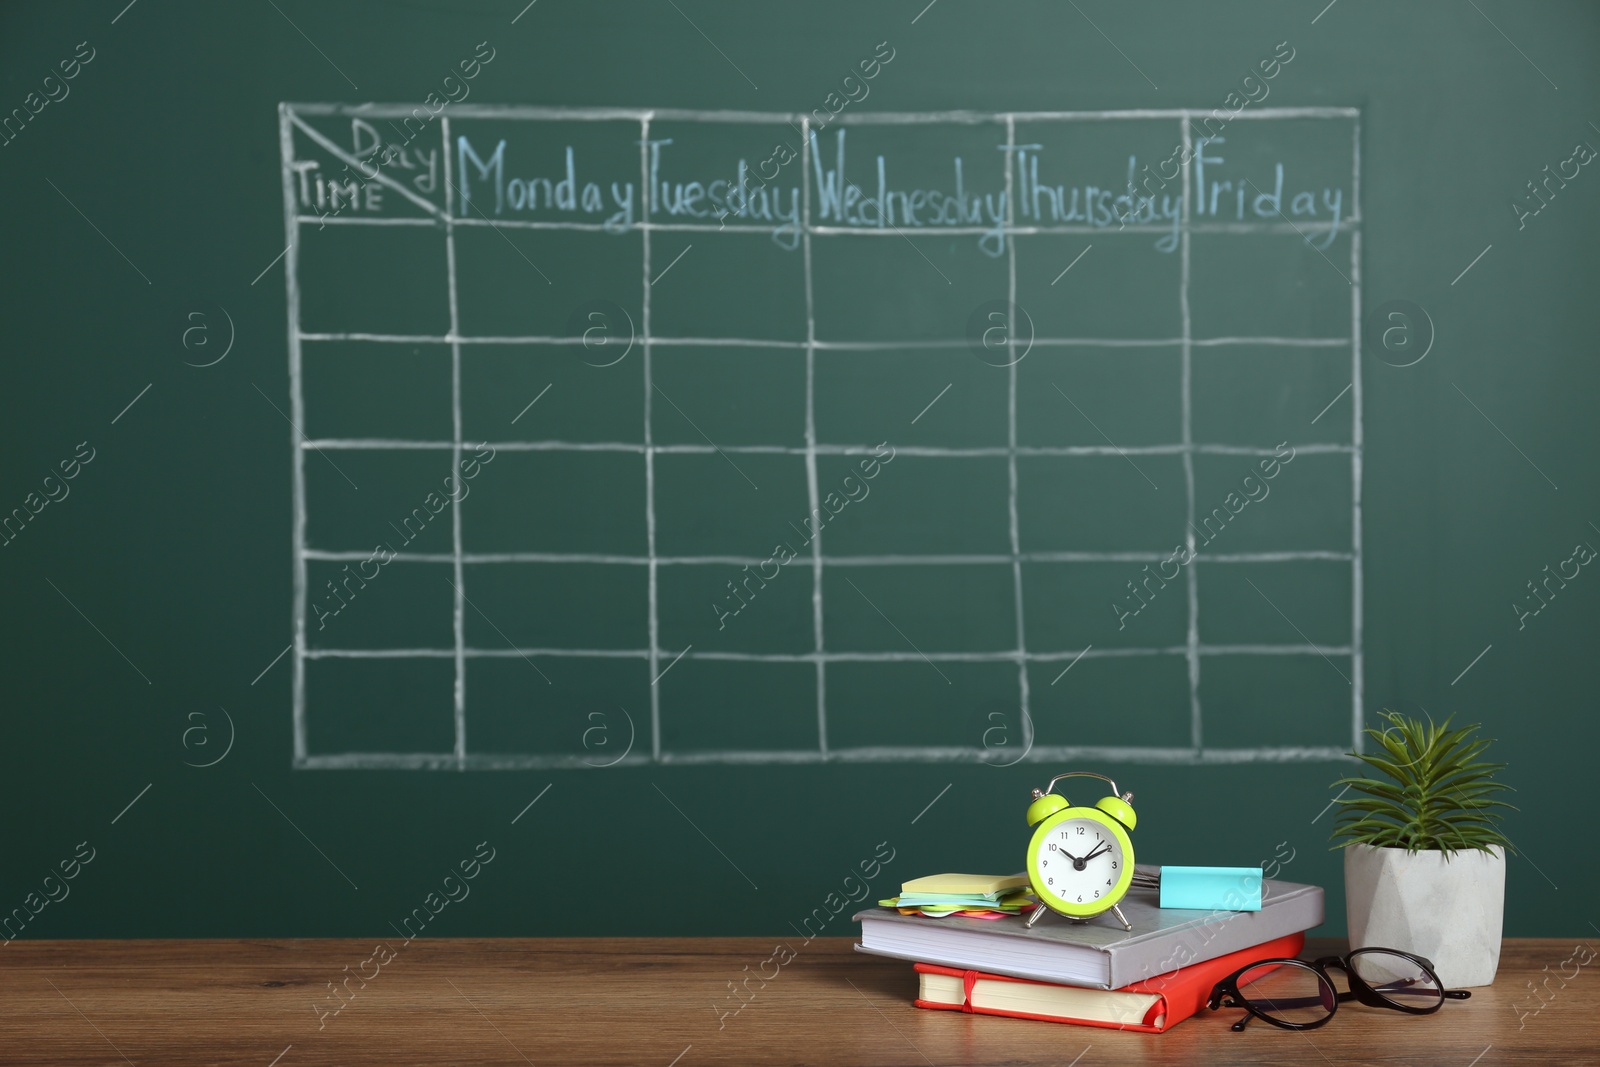 Photo of Alarm clock, stationery and plant on wooden table near green chalkboard with drawn school timetable